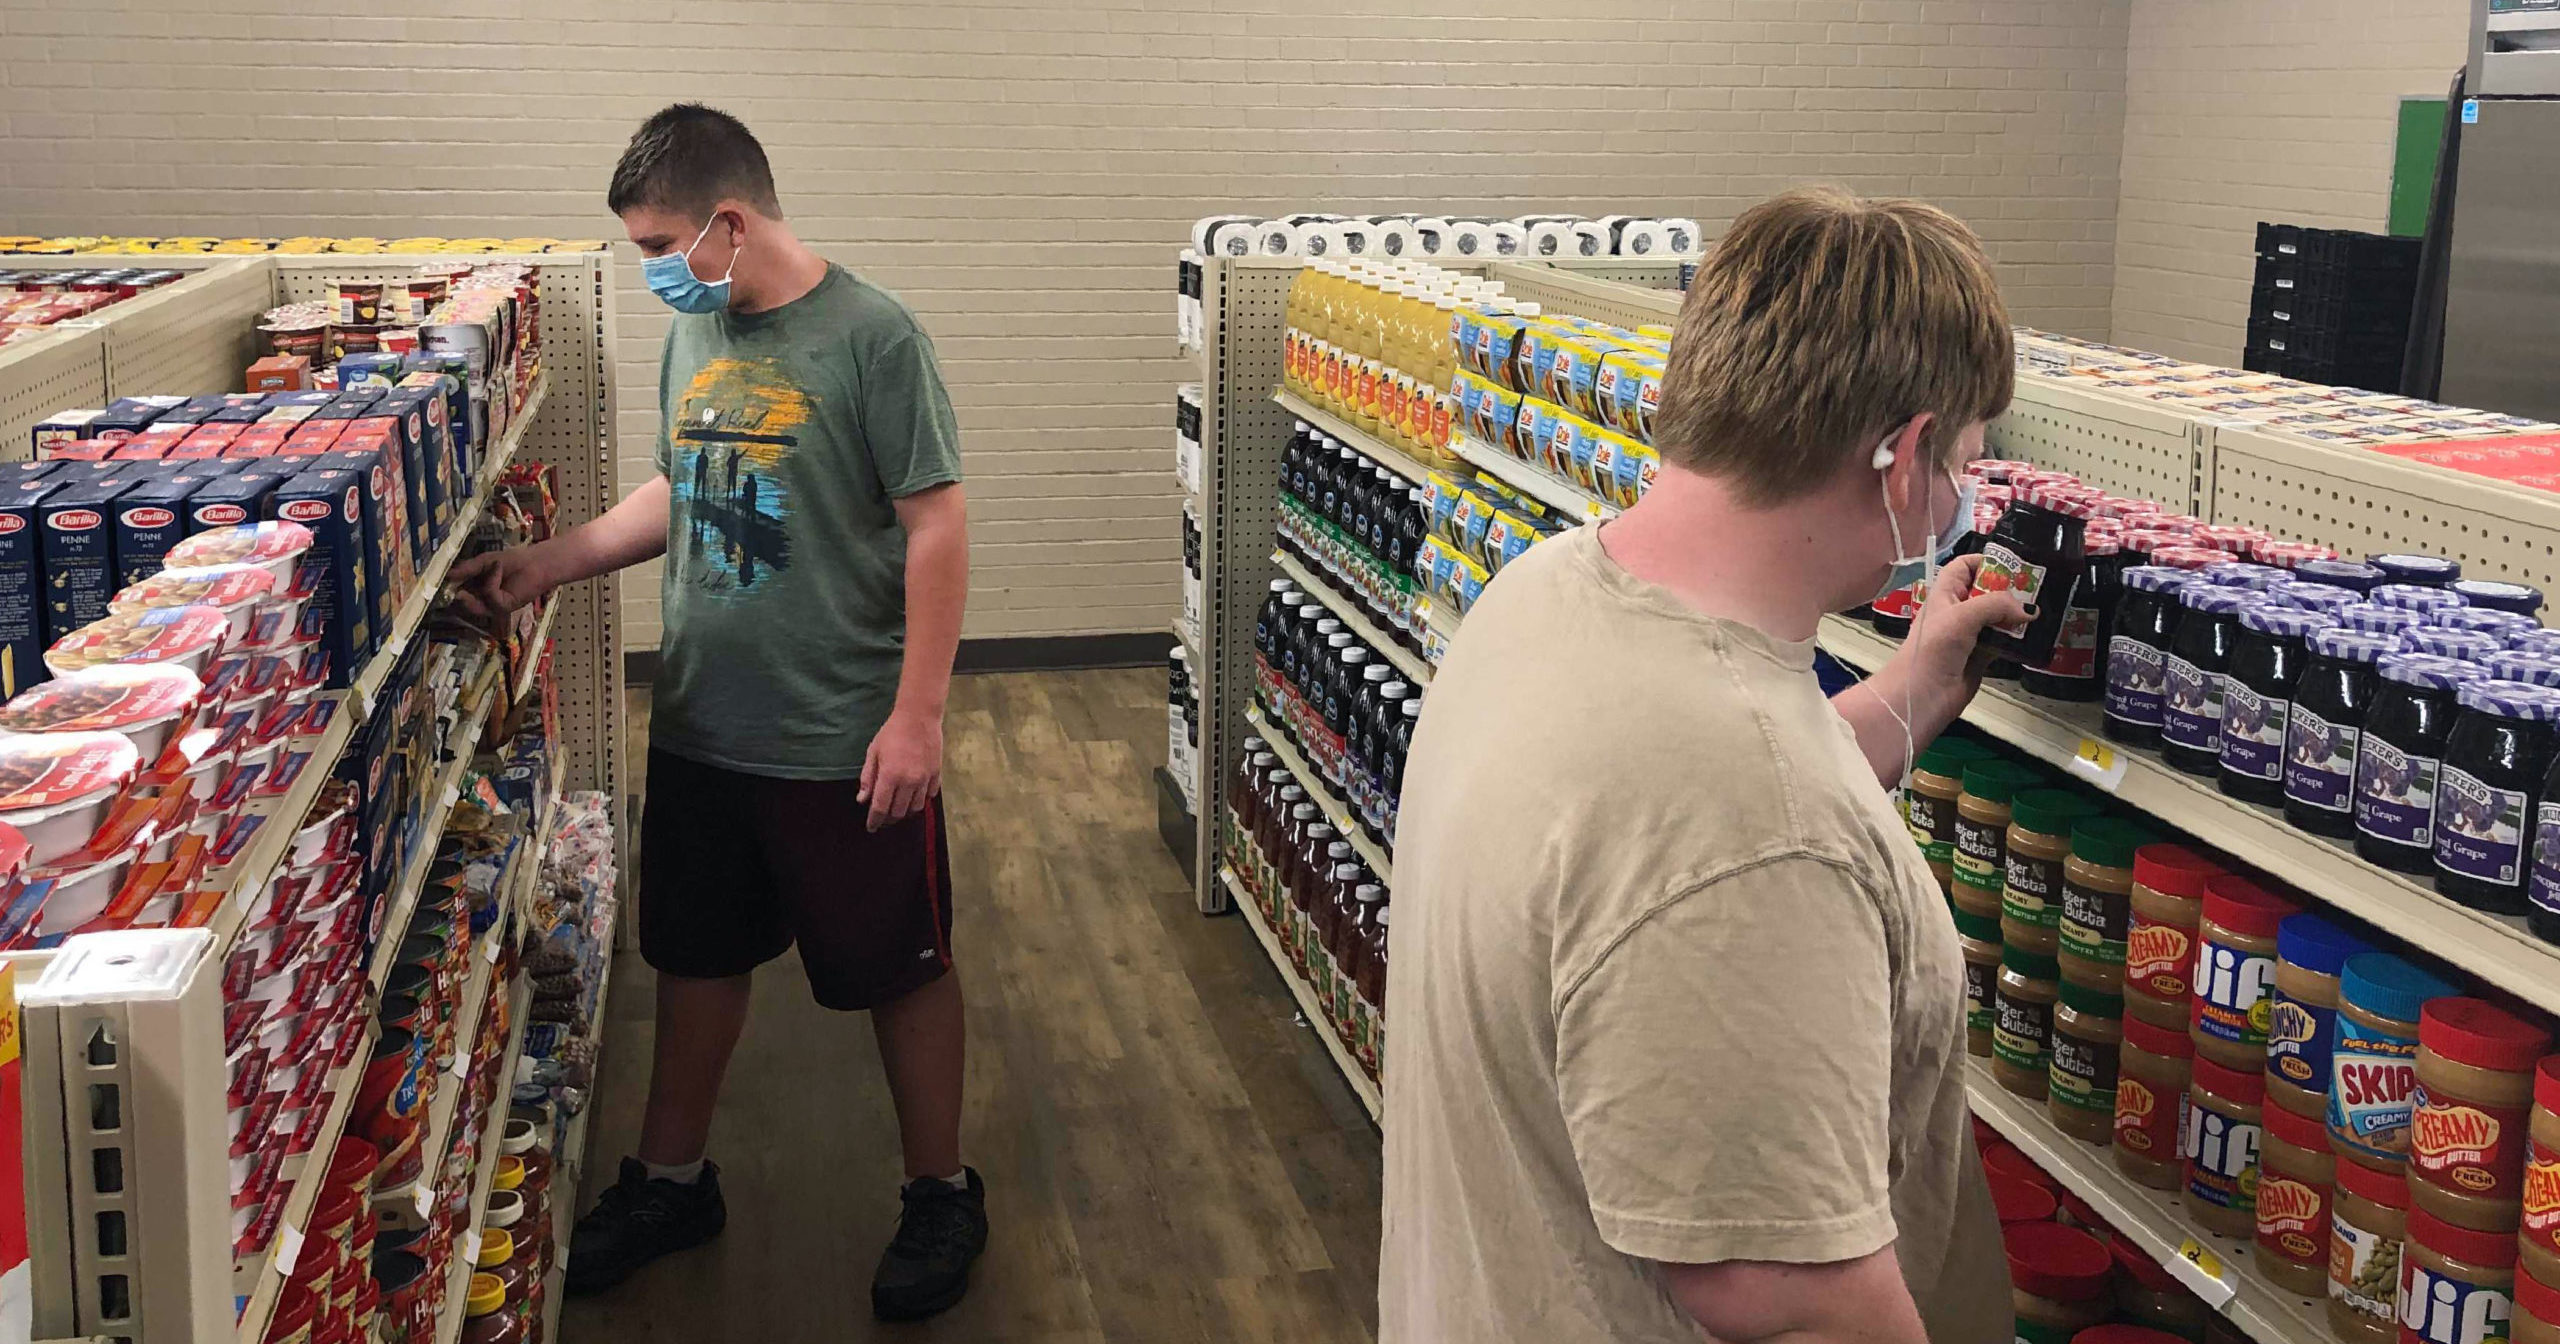 Student Hunter Weertman, 16, left, stocks shelves and takes inventory while working as a manager of the student-led free grocery store at Linda Tutt High School on Nov. 20, 2020, in Sanger, Texas.